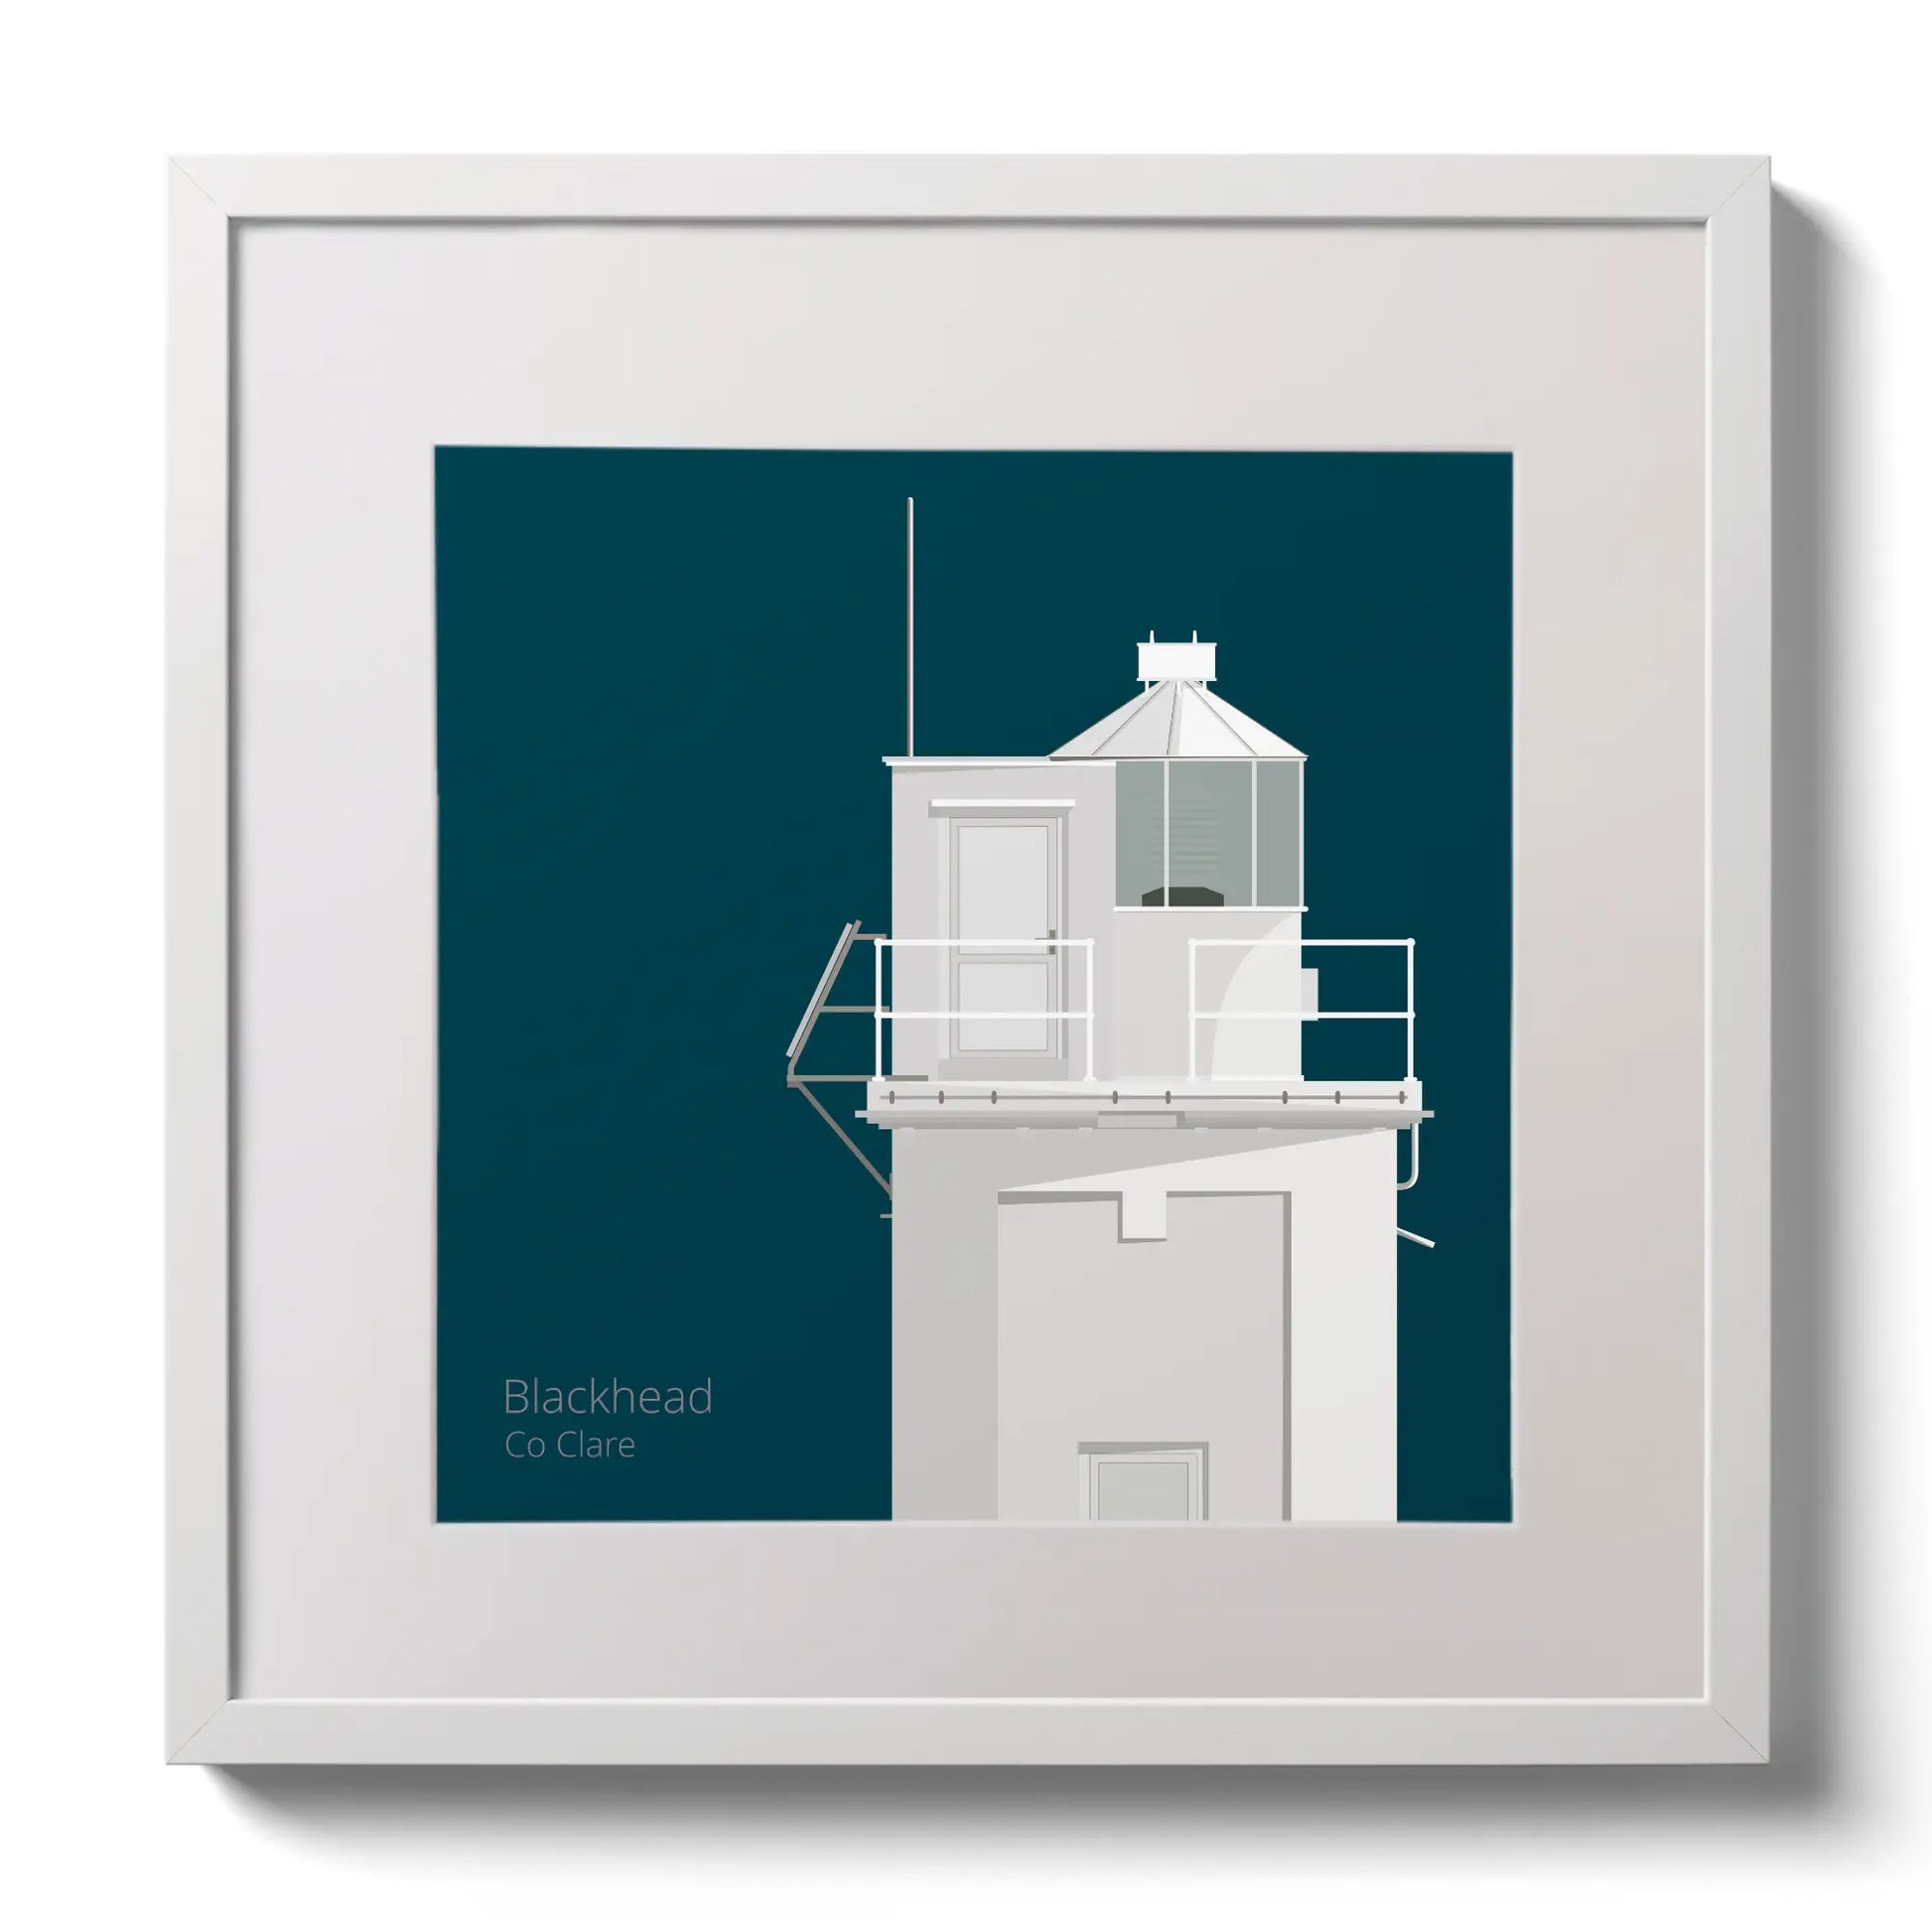 Illustration of Blackhead lighthouse on a midnight blue background,  in a white square frame measuring 30x30cm.